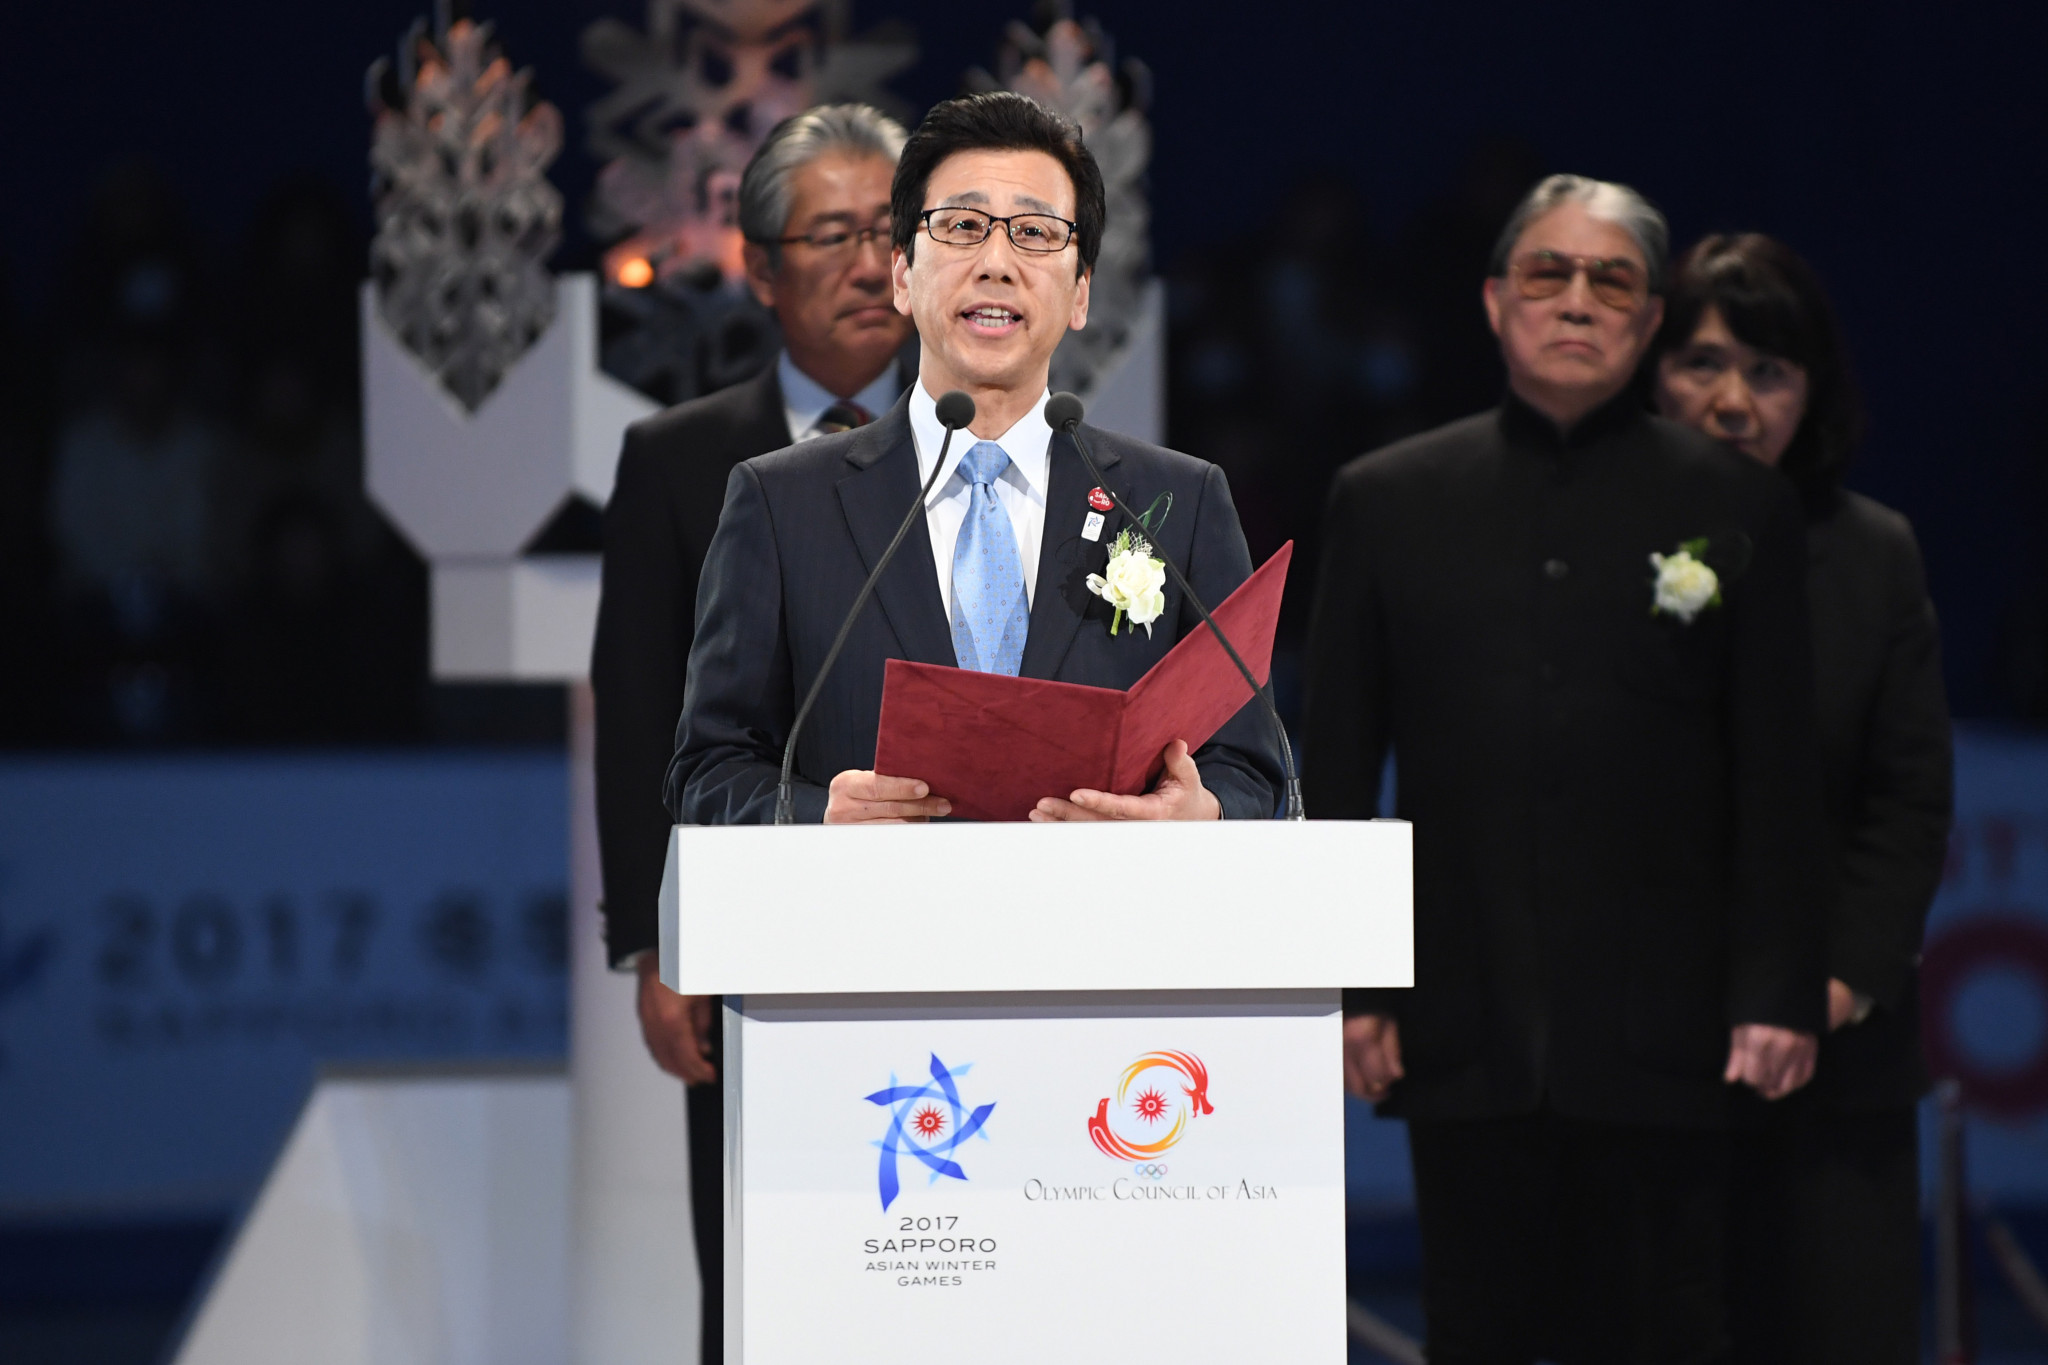 Sapporo's Mayor Katsuhiro Akimoto says a successful bid to host the 2030 Winter Olympics and Paralympics is very important to Sapporo's future ©Getty Images 